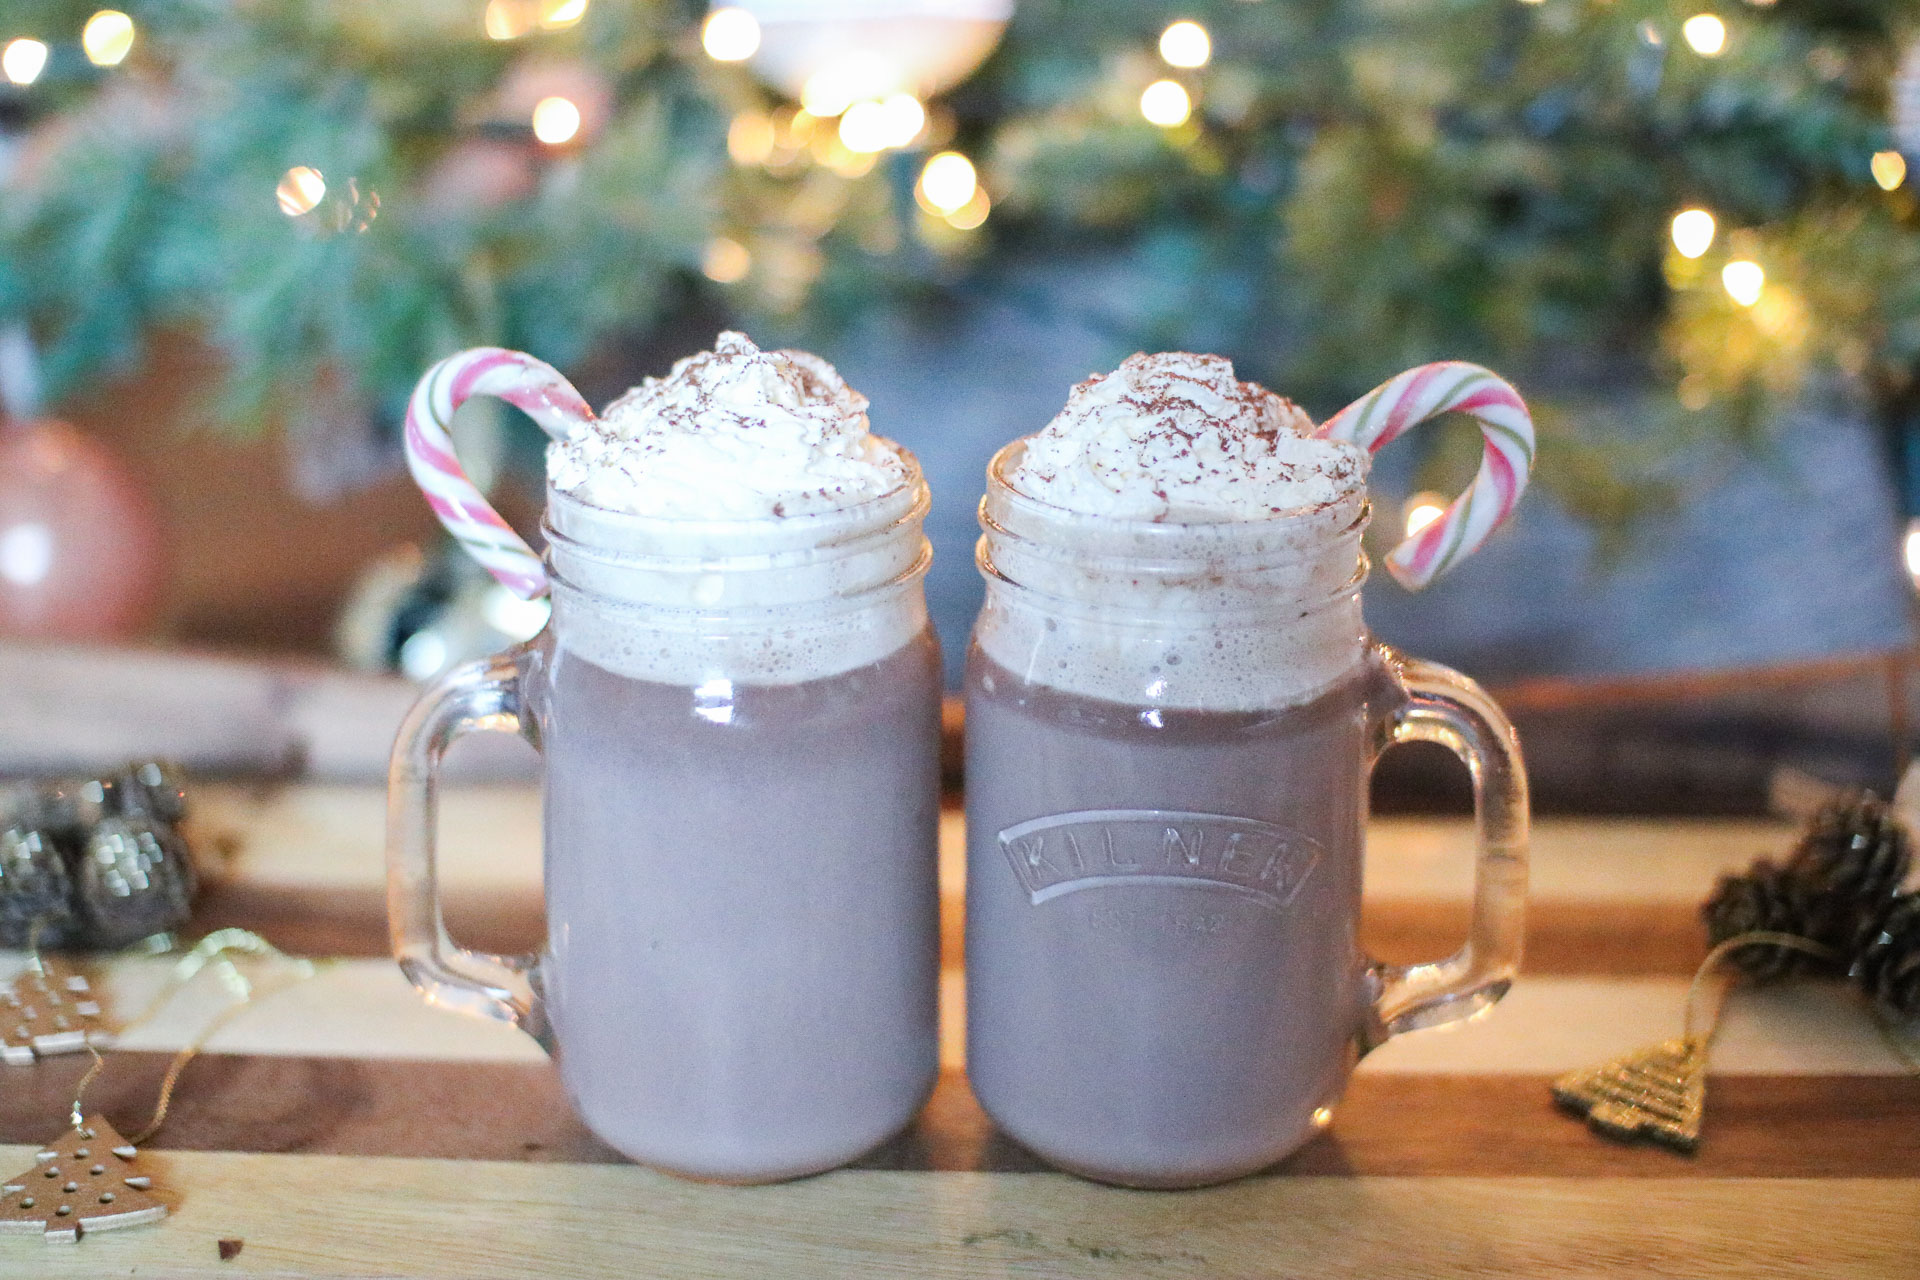 nutella and baileys hot chocolate recipe. Christmas festive hot drink